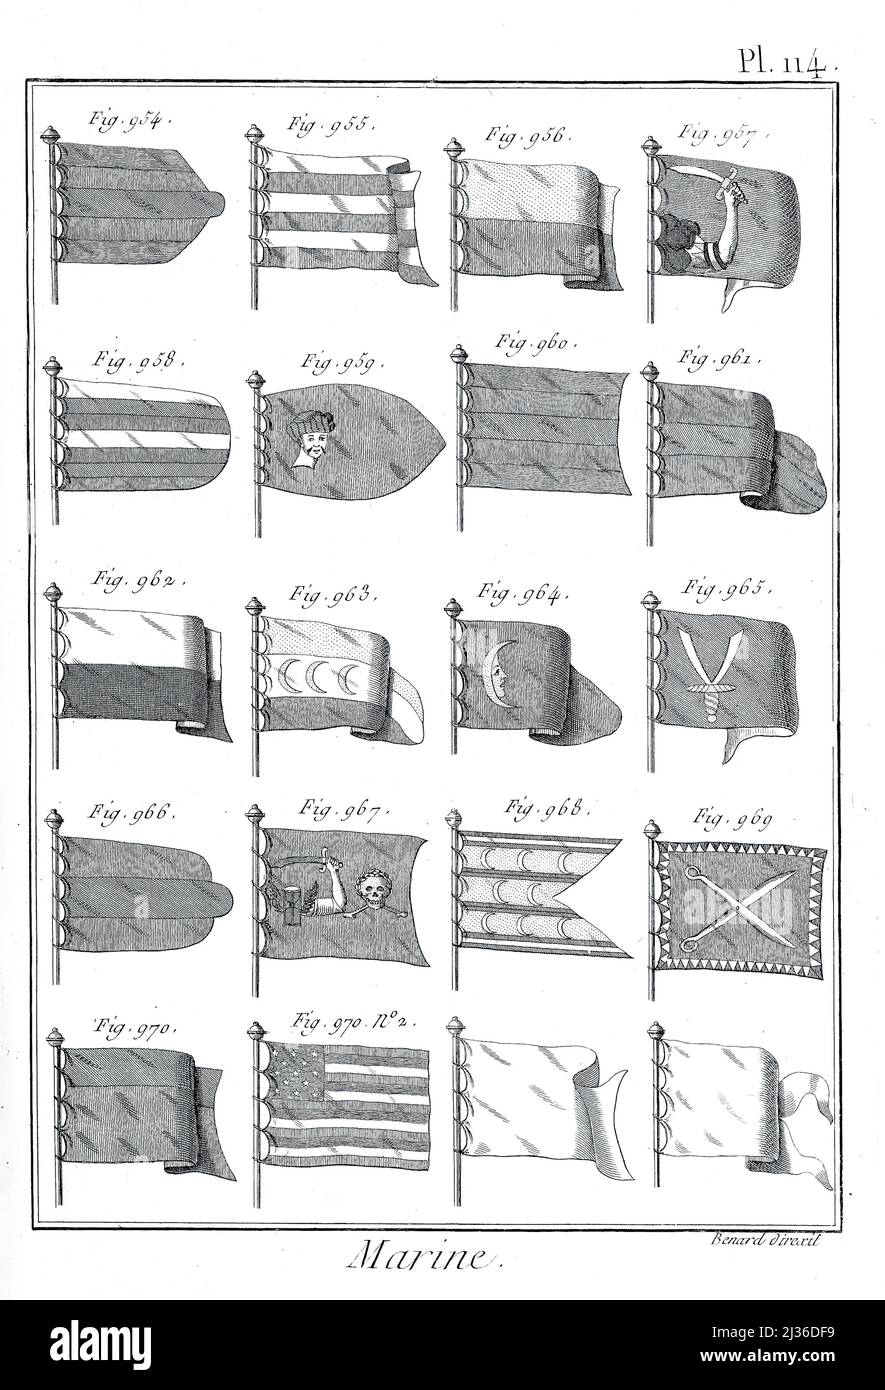 Maritime Flags and banners From the Encyclopédie méthodique Maritime Encyclopedia Publisher Paris : Panckoucke ; Liège : Plomteux in 1787 containing drawings and blueprints of shipbuilding,  and Illustrations of maritime subjects plates drawn by Benard direxit Stock Photo